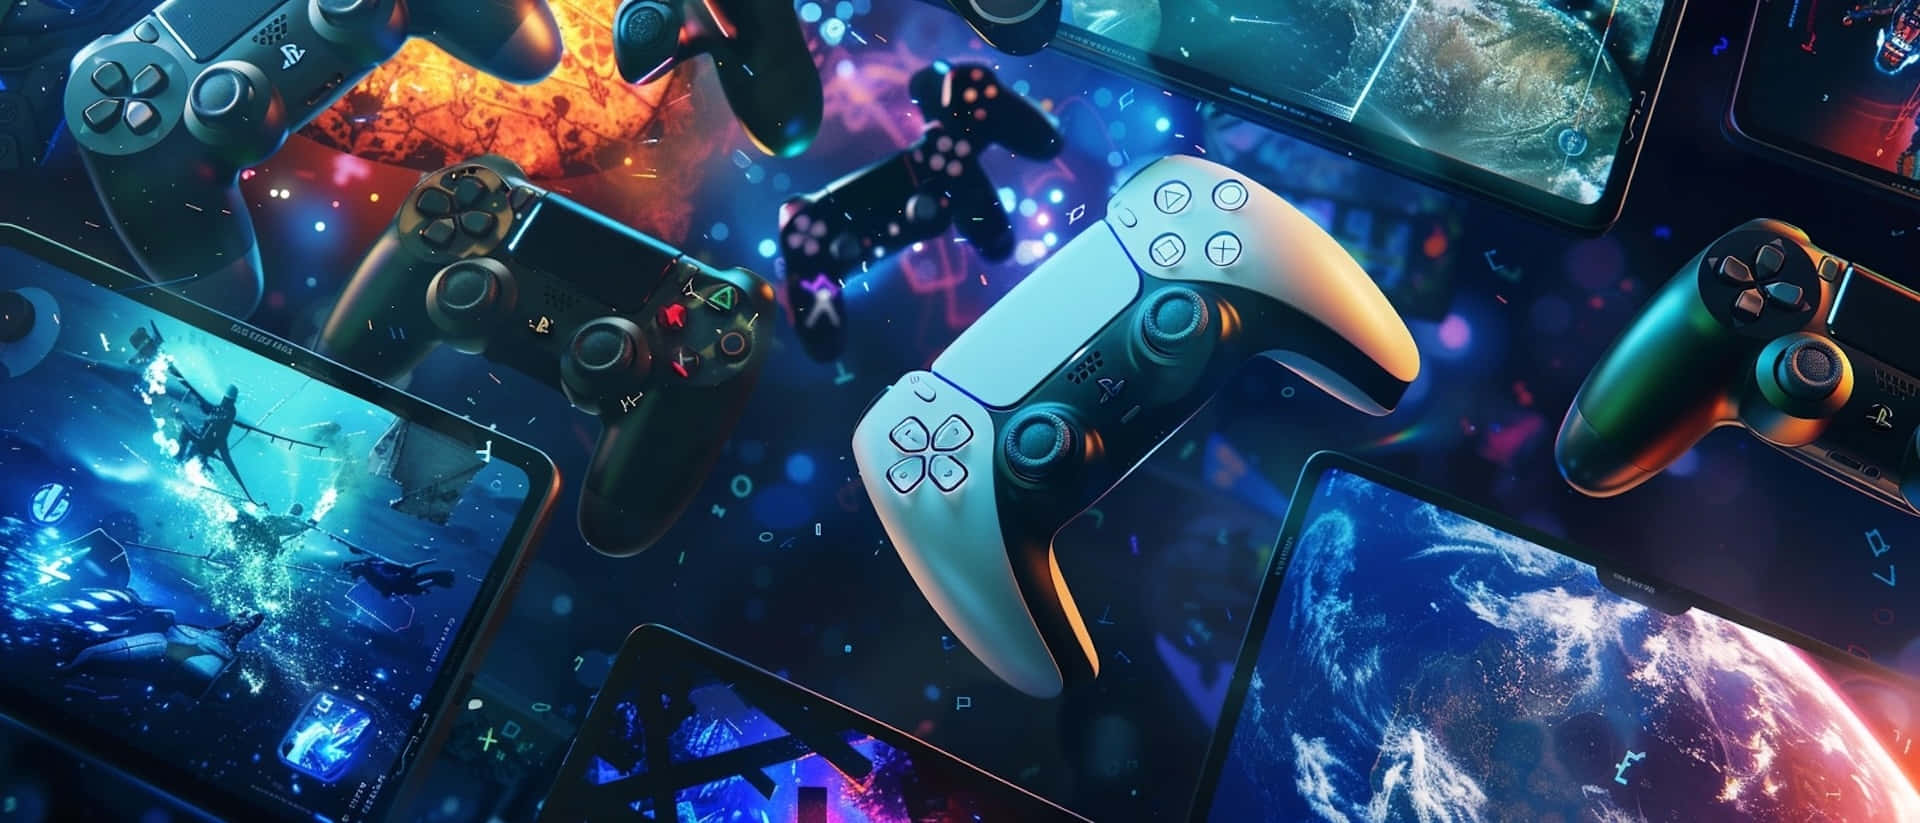 Play Station5 Controllersand Gaming Imagery Wallpaper